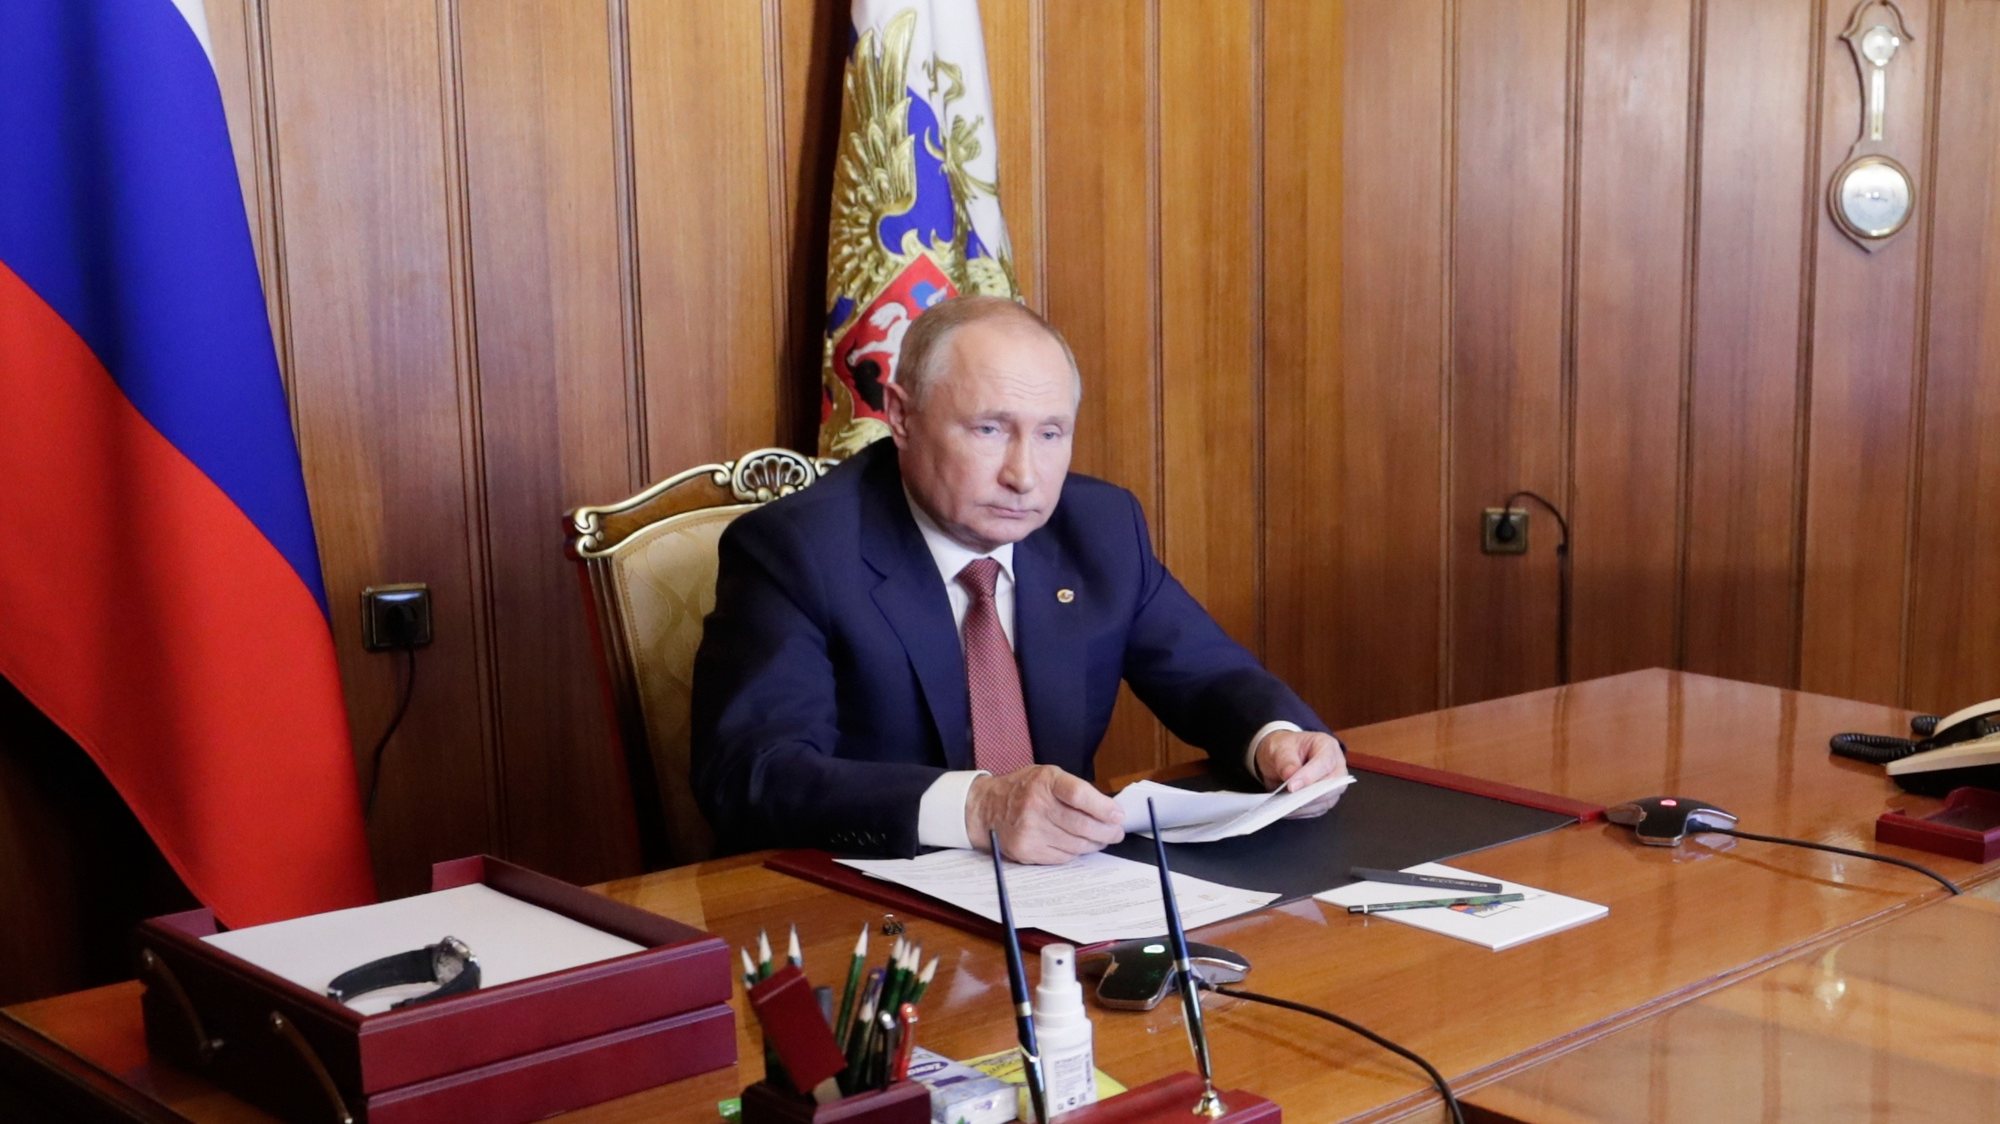 epa09563900 epa09563895 Russian President Vladimir Putin attends a meeting of the Supreme State Council of the Union State of Russia and Belarus via videoconference call  in Sevastopol, Crimea, 04 November 2021. Vladimir Putin makes a working trip to the Crimean peninsula on the National Unity Day which Russia marks on 04 November.  EPA/MIKHAIL METZEL / KREMLIN POOL / SPUTNIK / POOL MANDATORY CREDIT